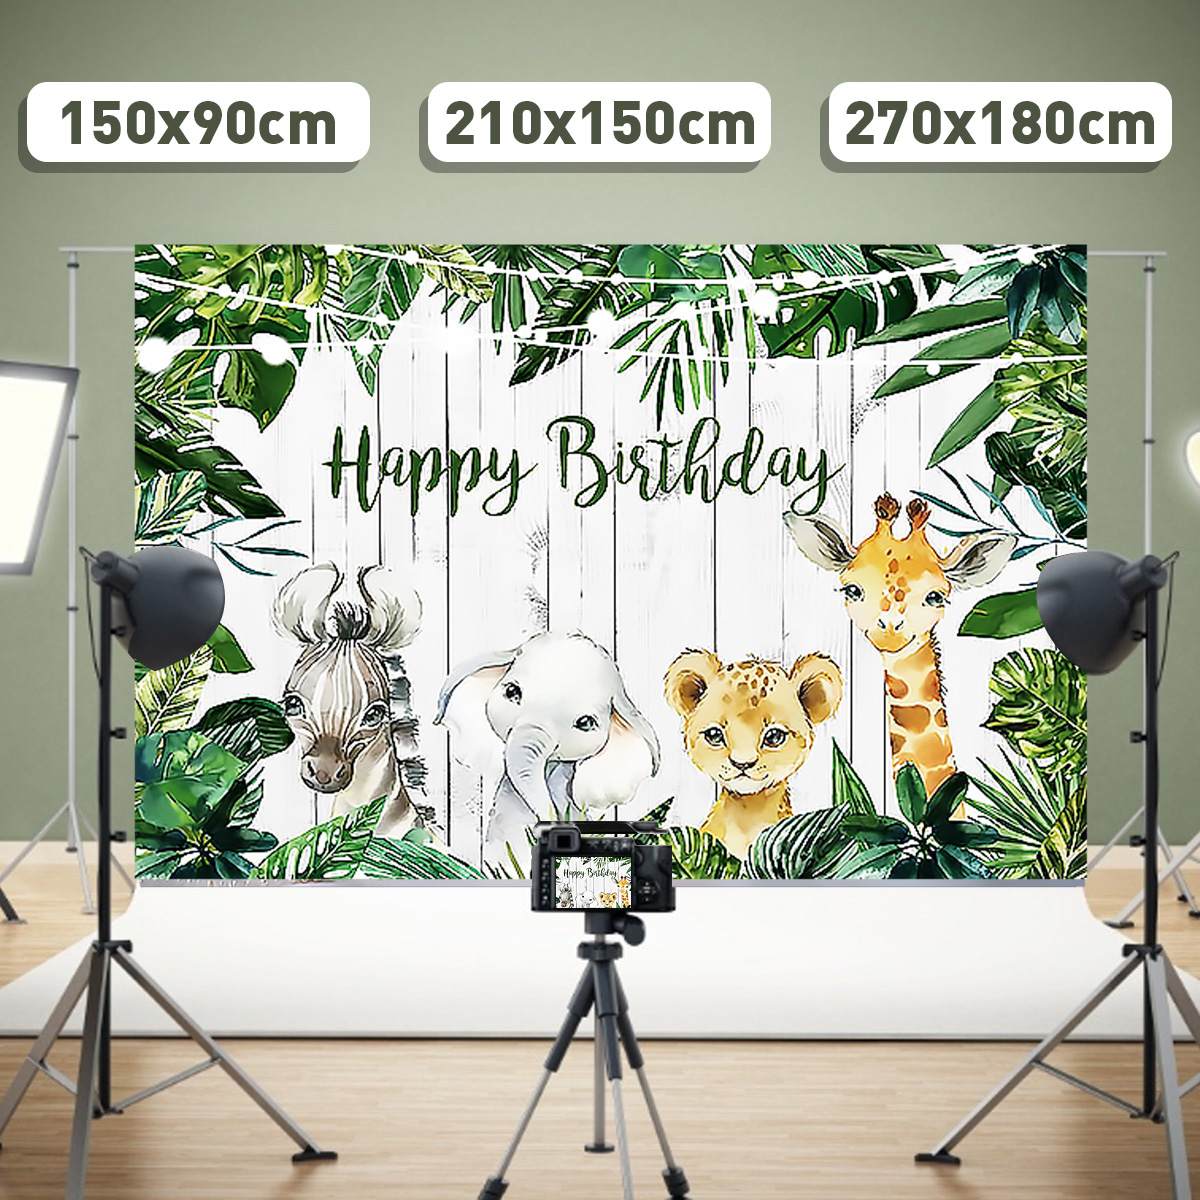 3-Size-Jungle-Green-Forest-Backdrop-Happy-Birthday-Background-Photography-Woodland-Party-Prop-1876181-3